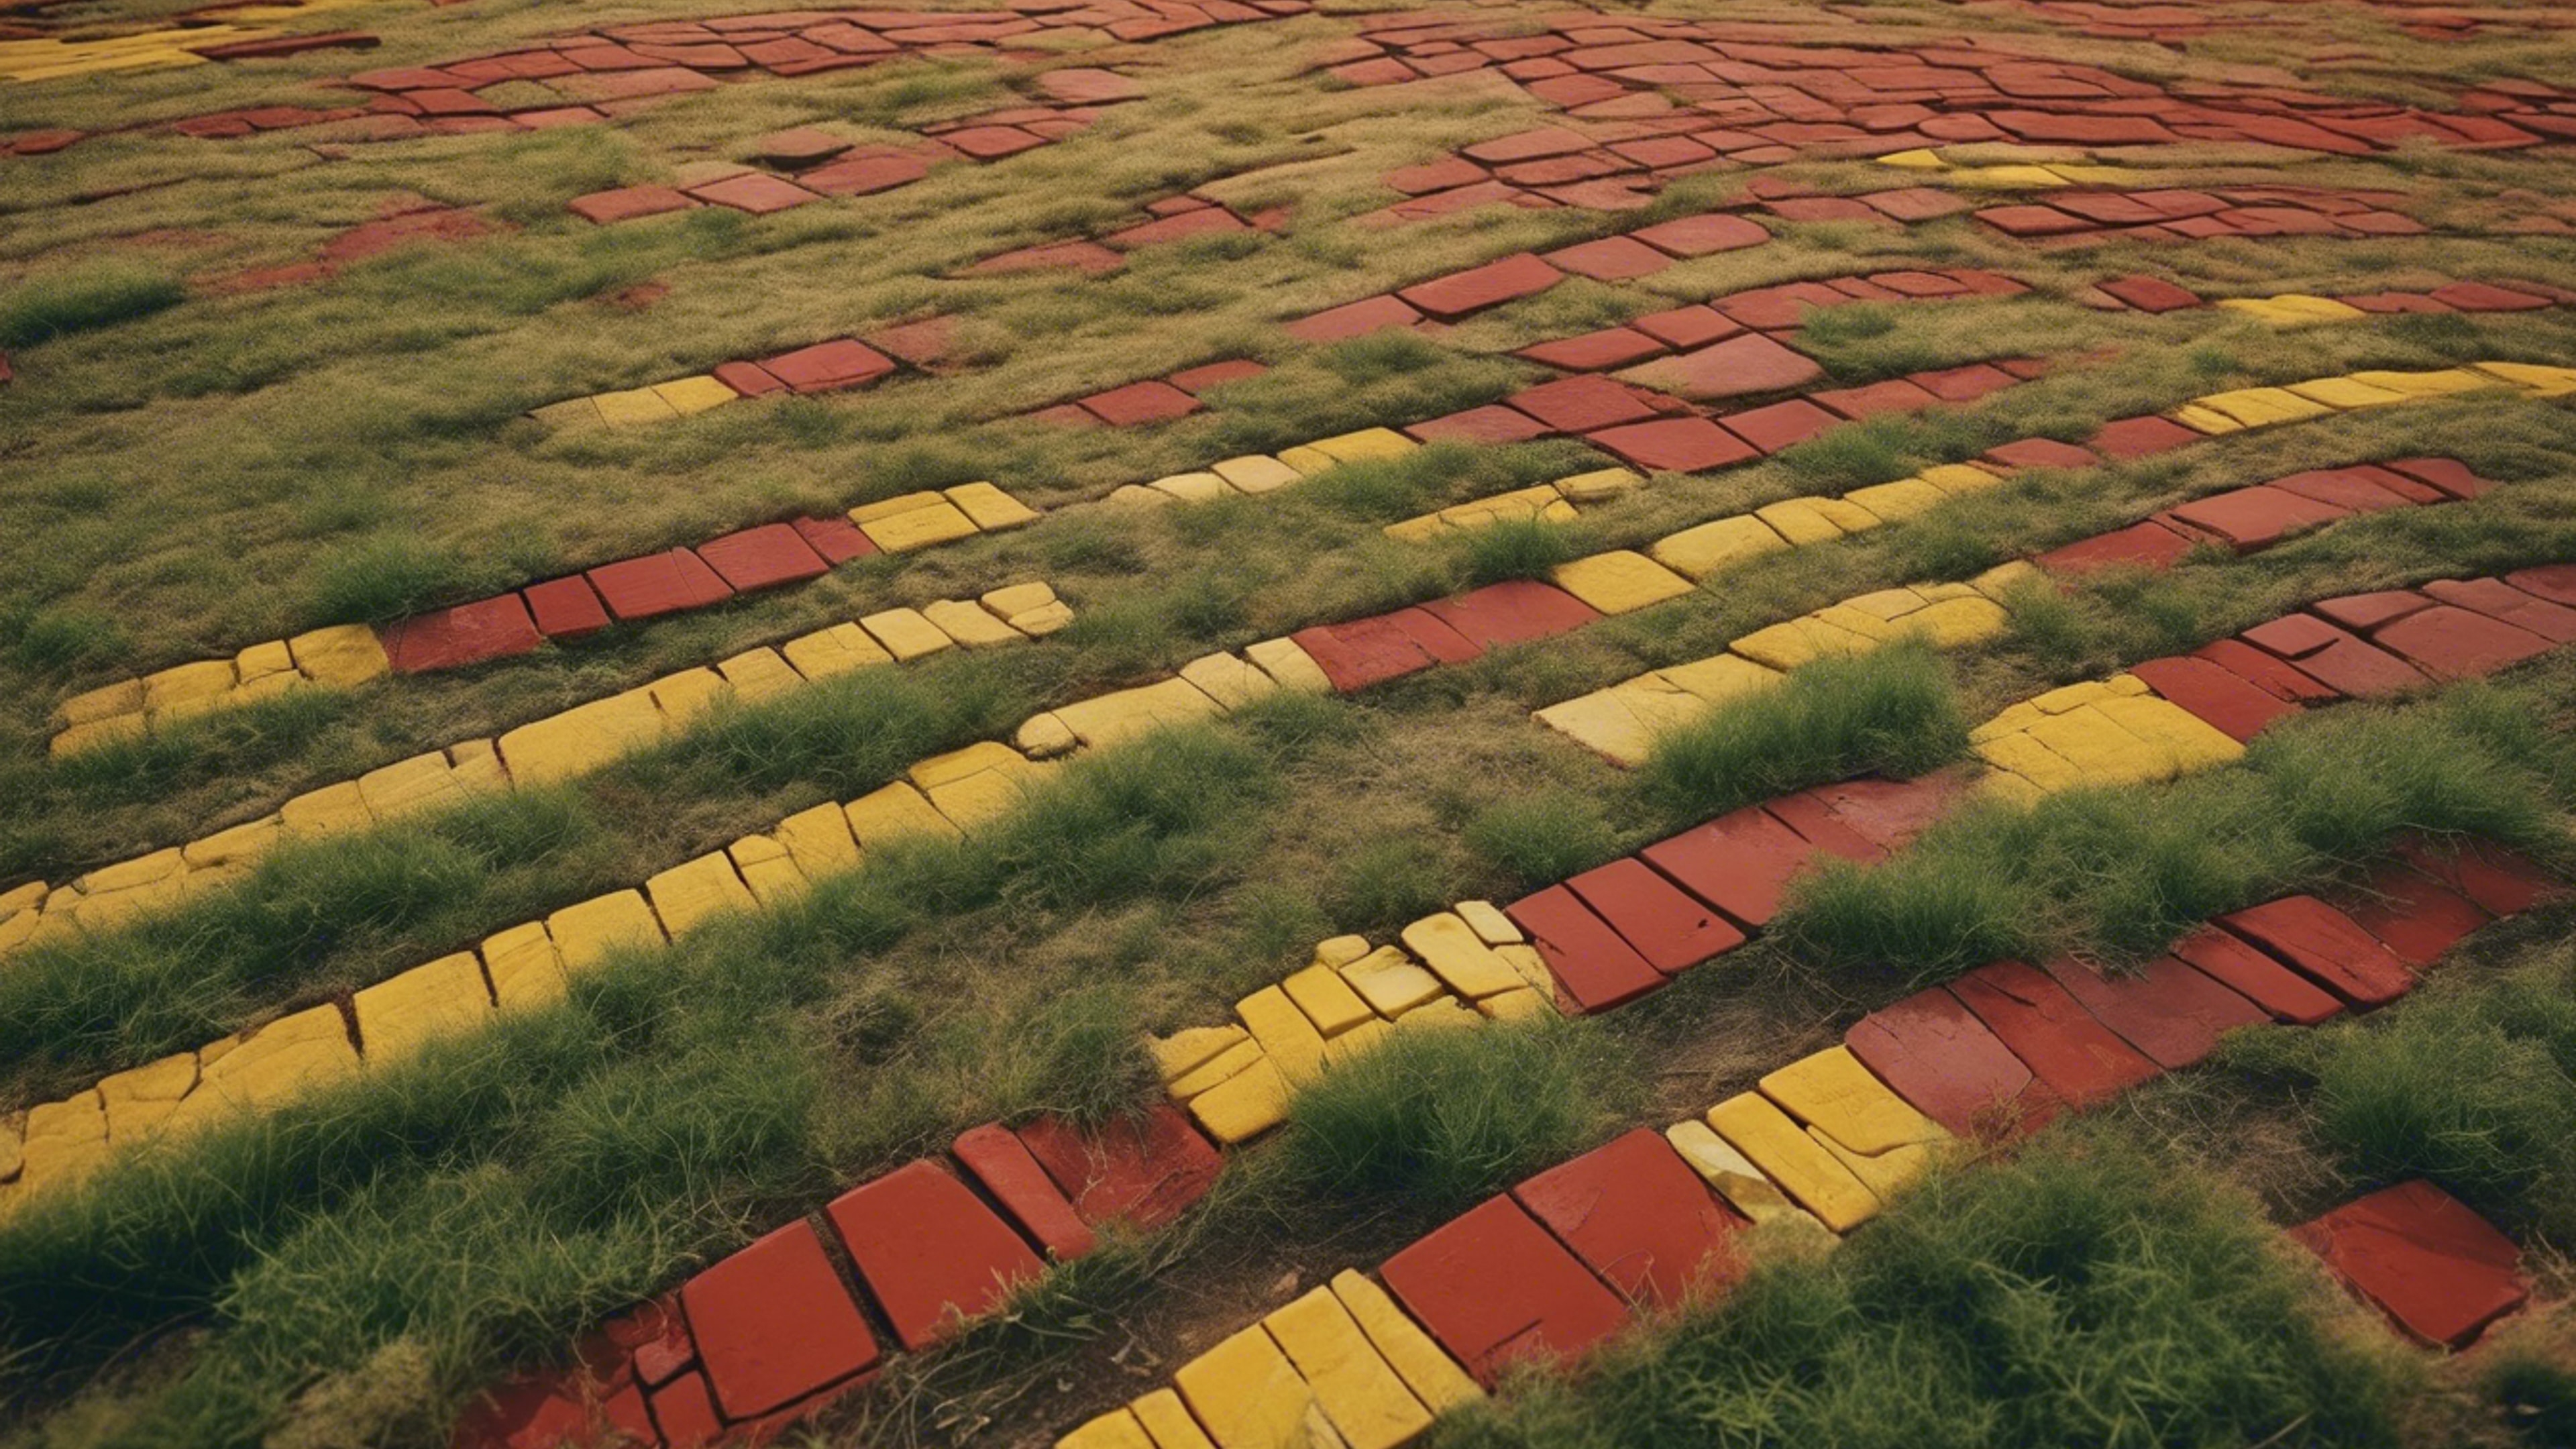 A bird's eye view of a red and yellow brick road weaving through a meadow. Tapeta[b665fbc055ed4704af98]